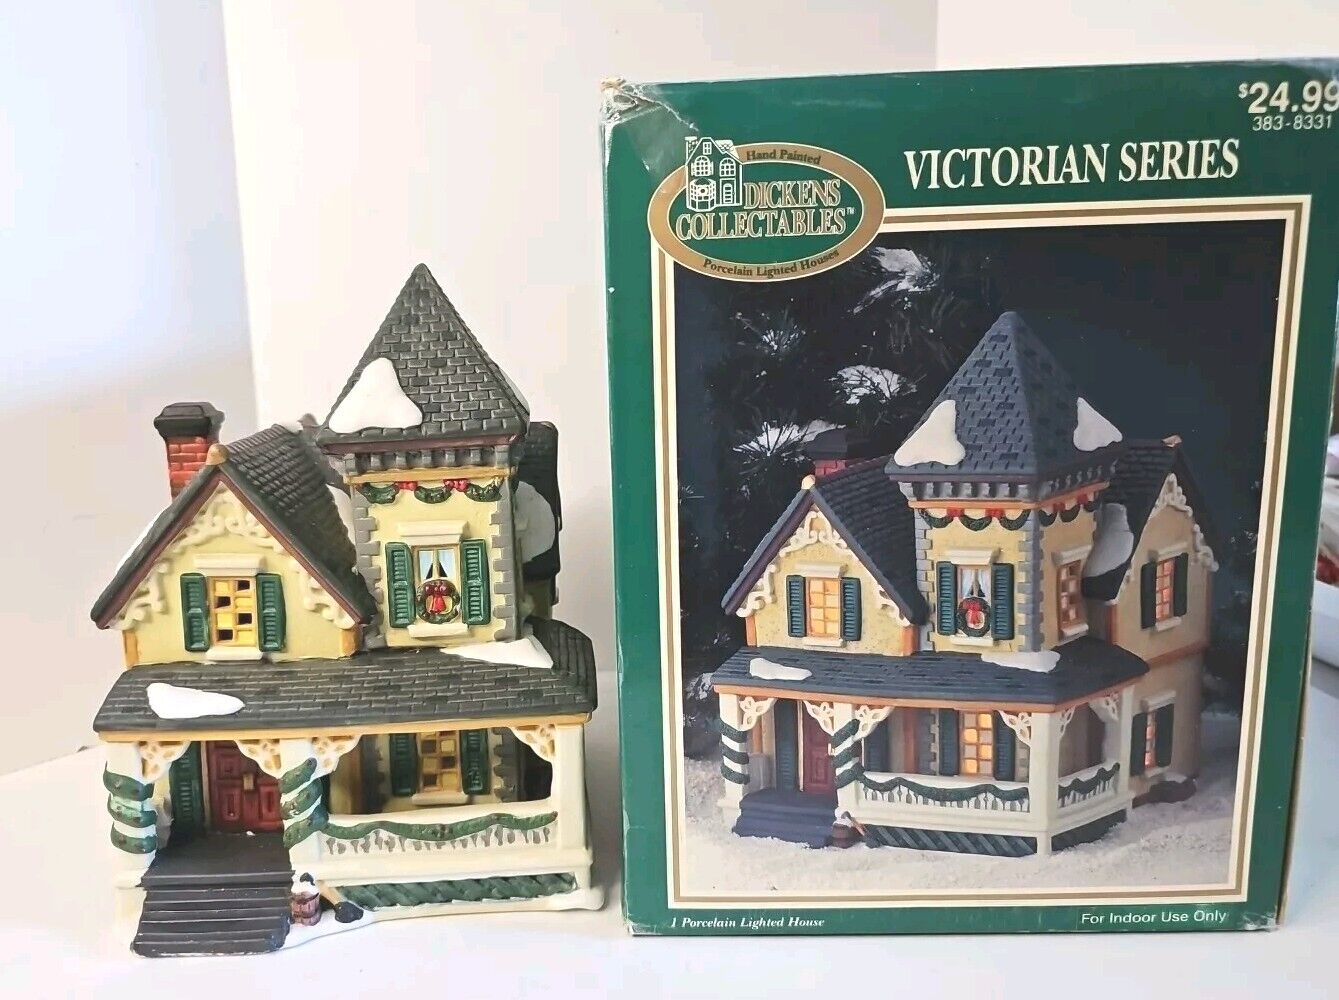 Dickens Collectables 1997 Victorian Series 383-8331  Porcelain Lighted House